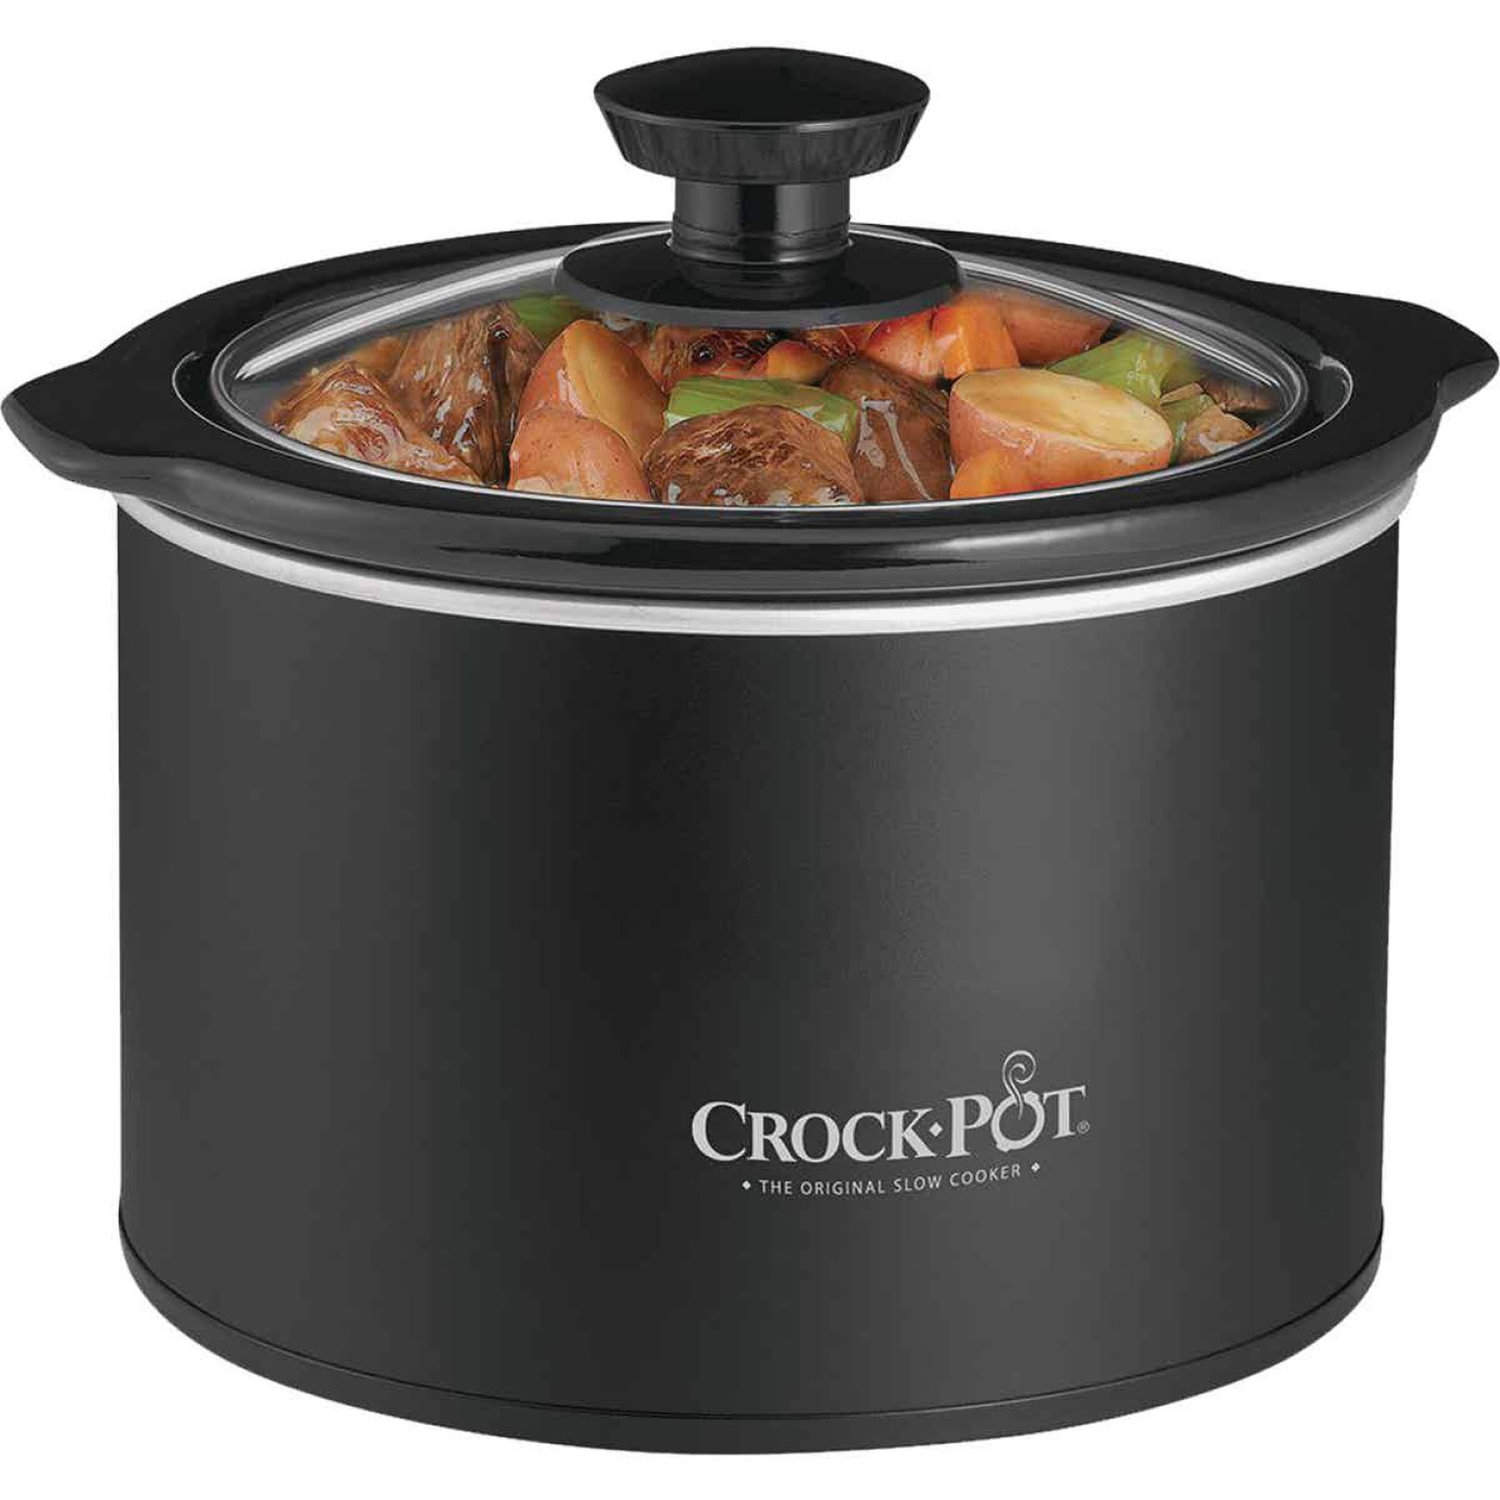 Crockpot 8 Quart Slow Cooker with Auto Warm Setting and Cookbook, Black  Stainles